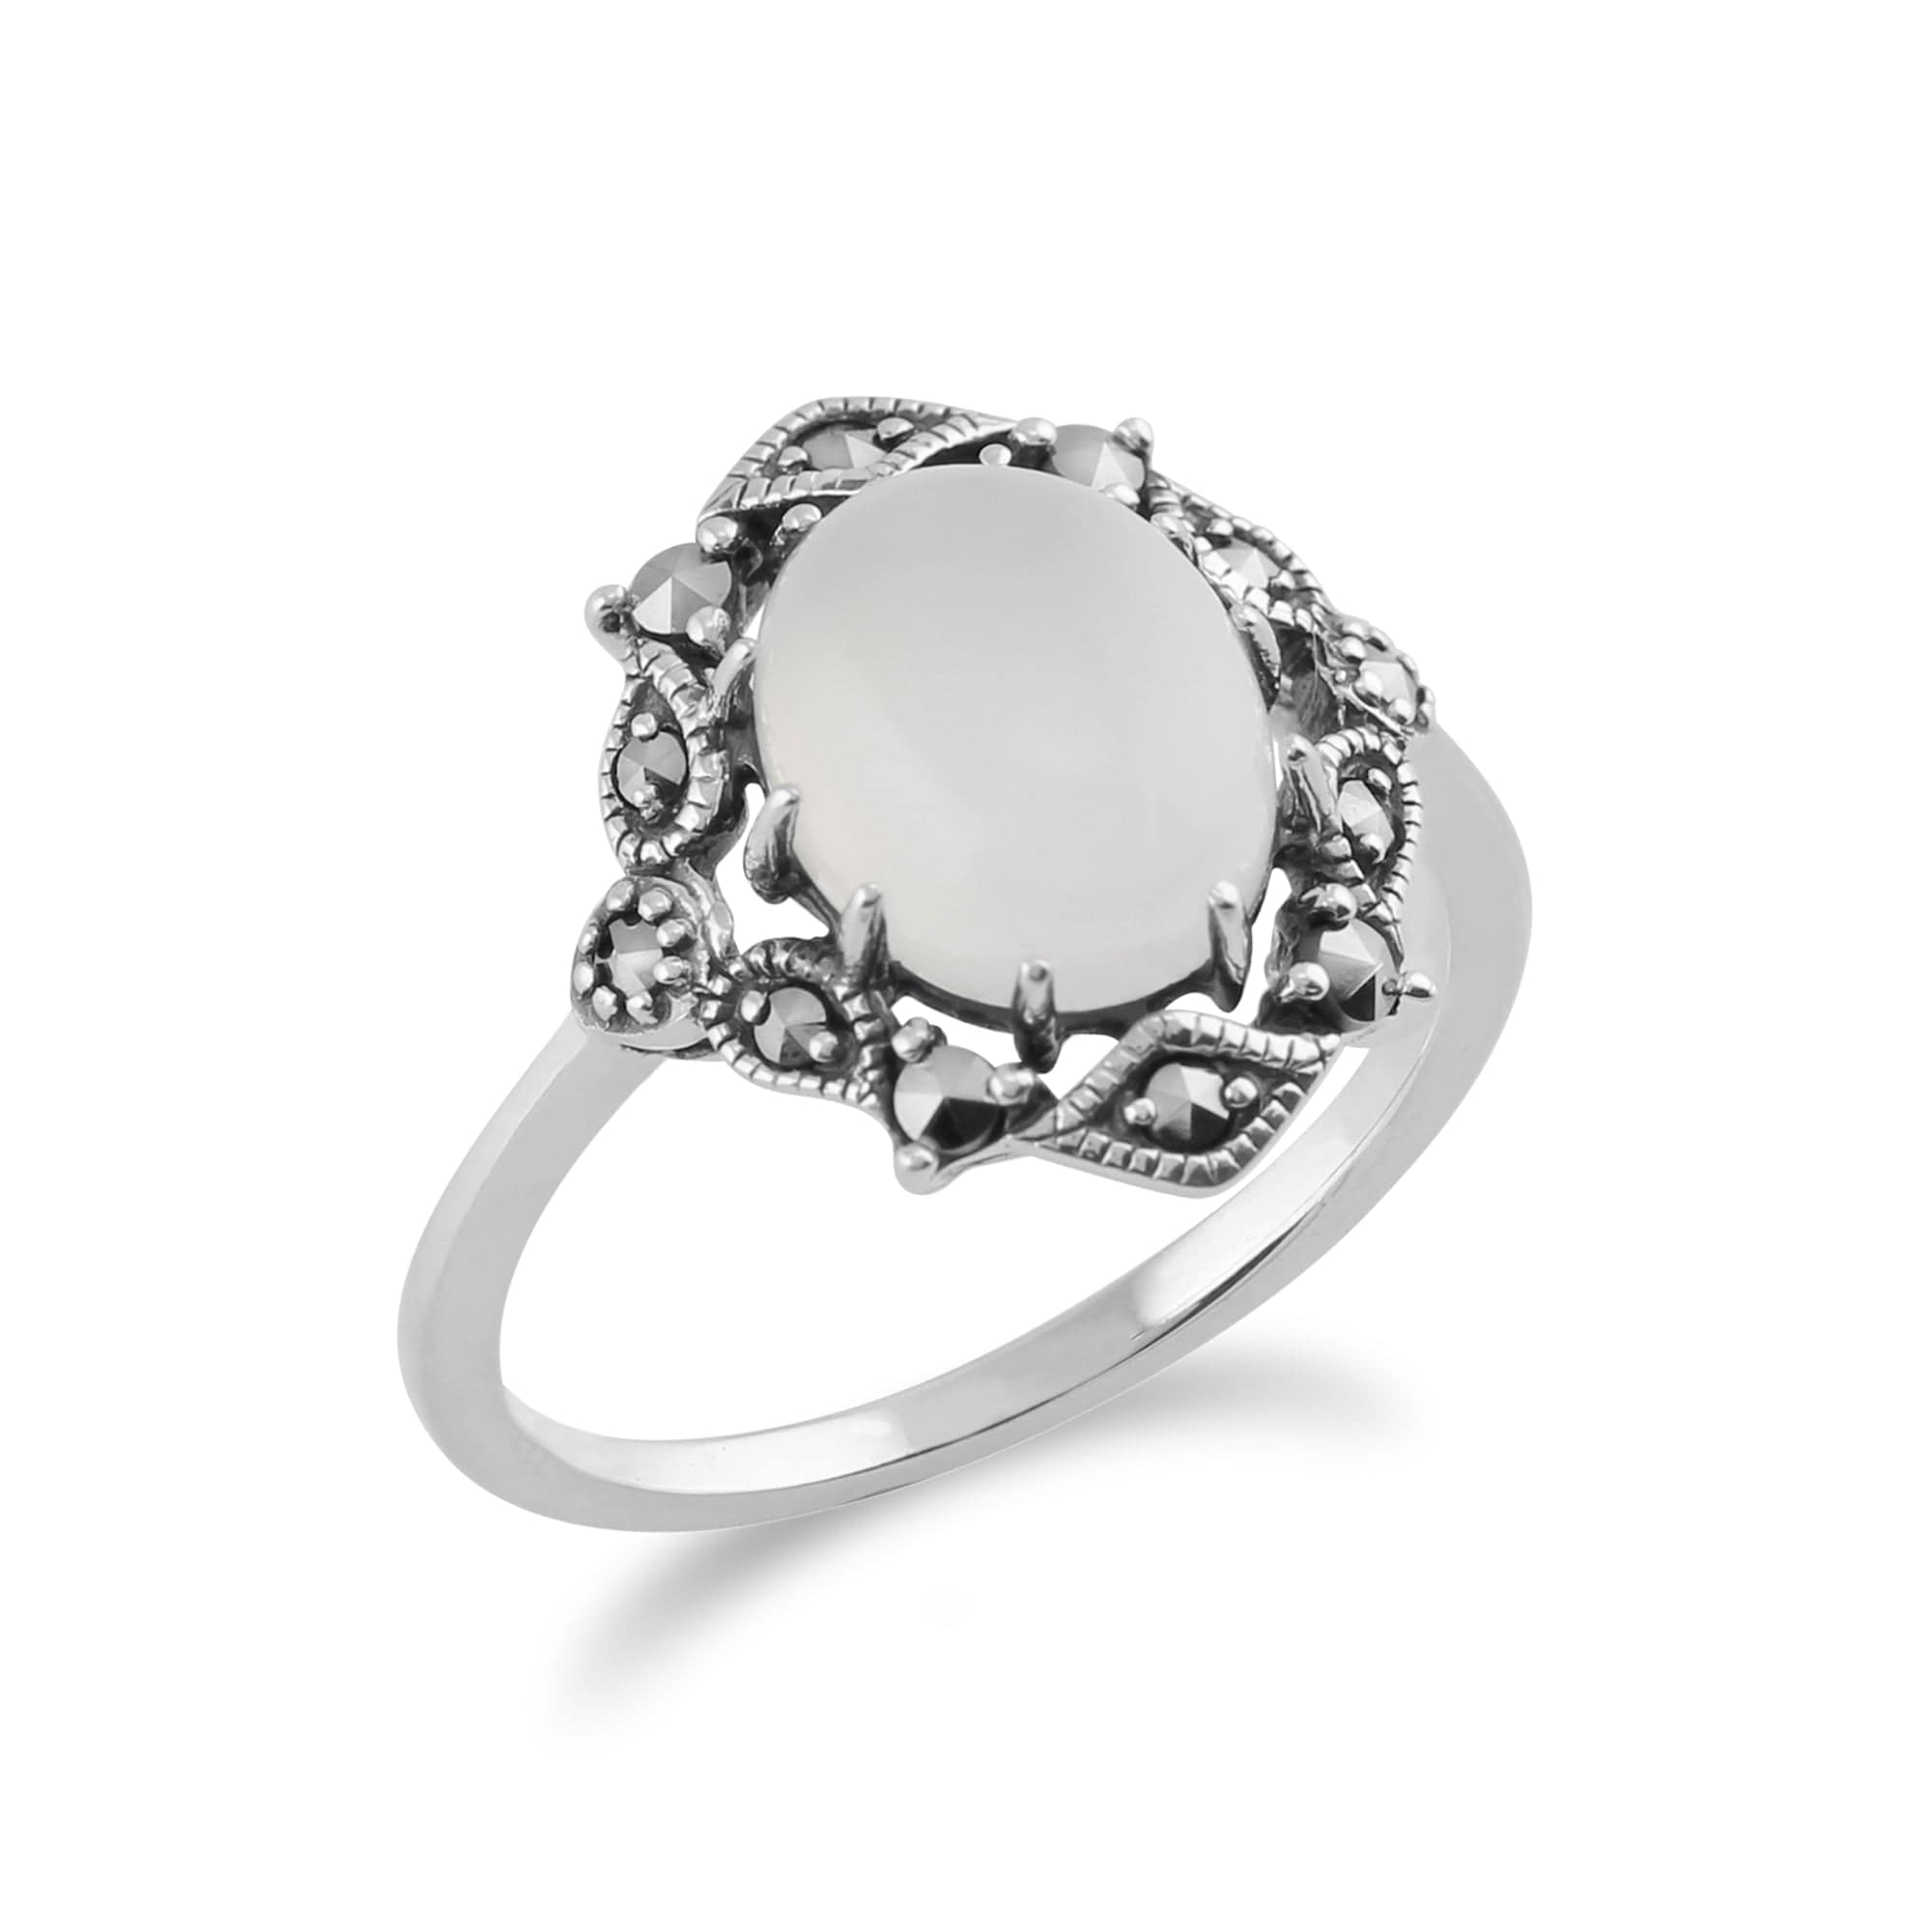 214R480007925 Art Nouveau Style Oval Moonstone Cabochon & Marcasite Statement Ring in 925 Sterling Silver 2